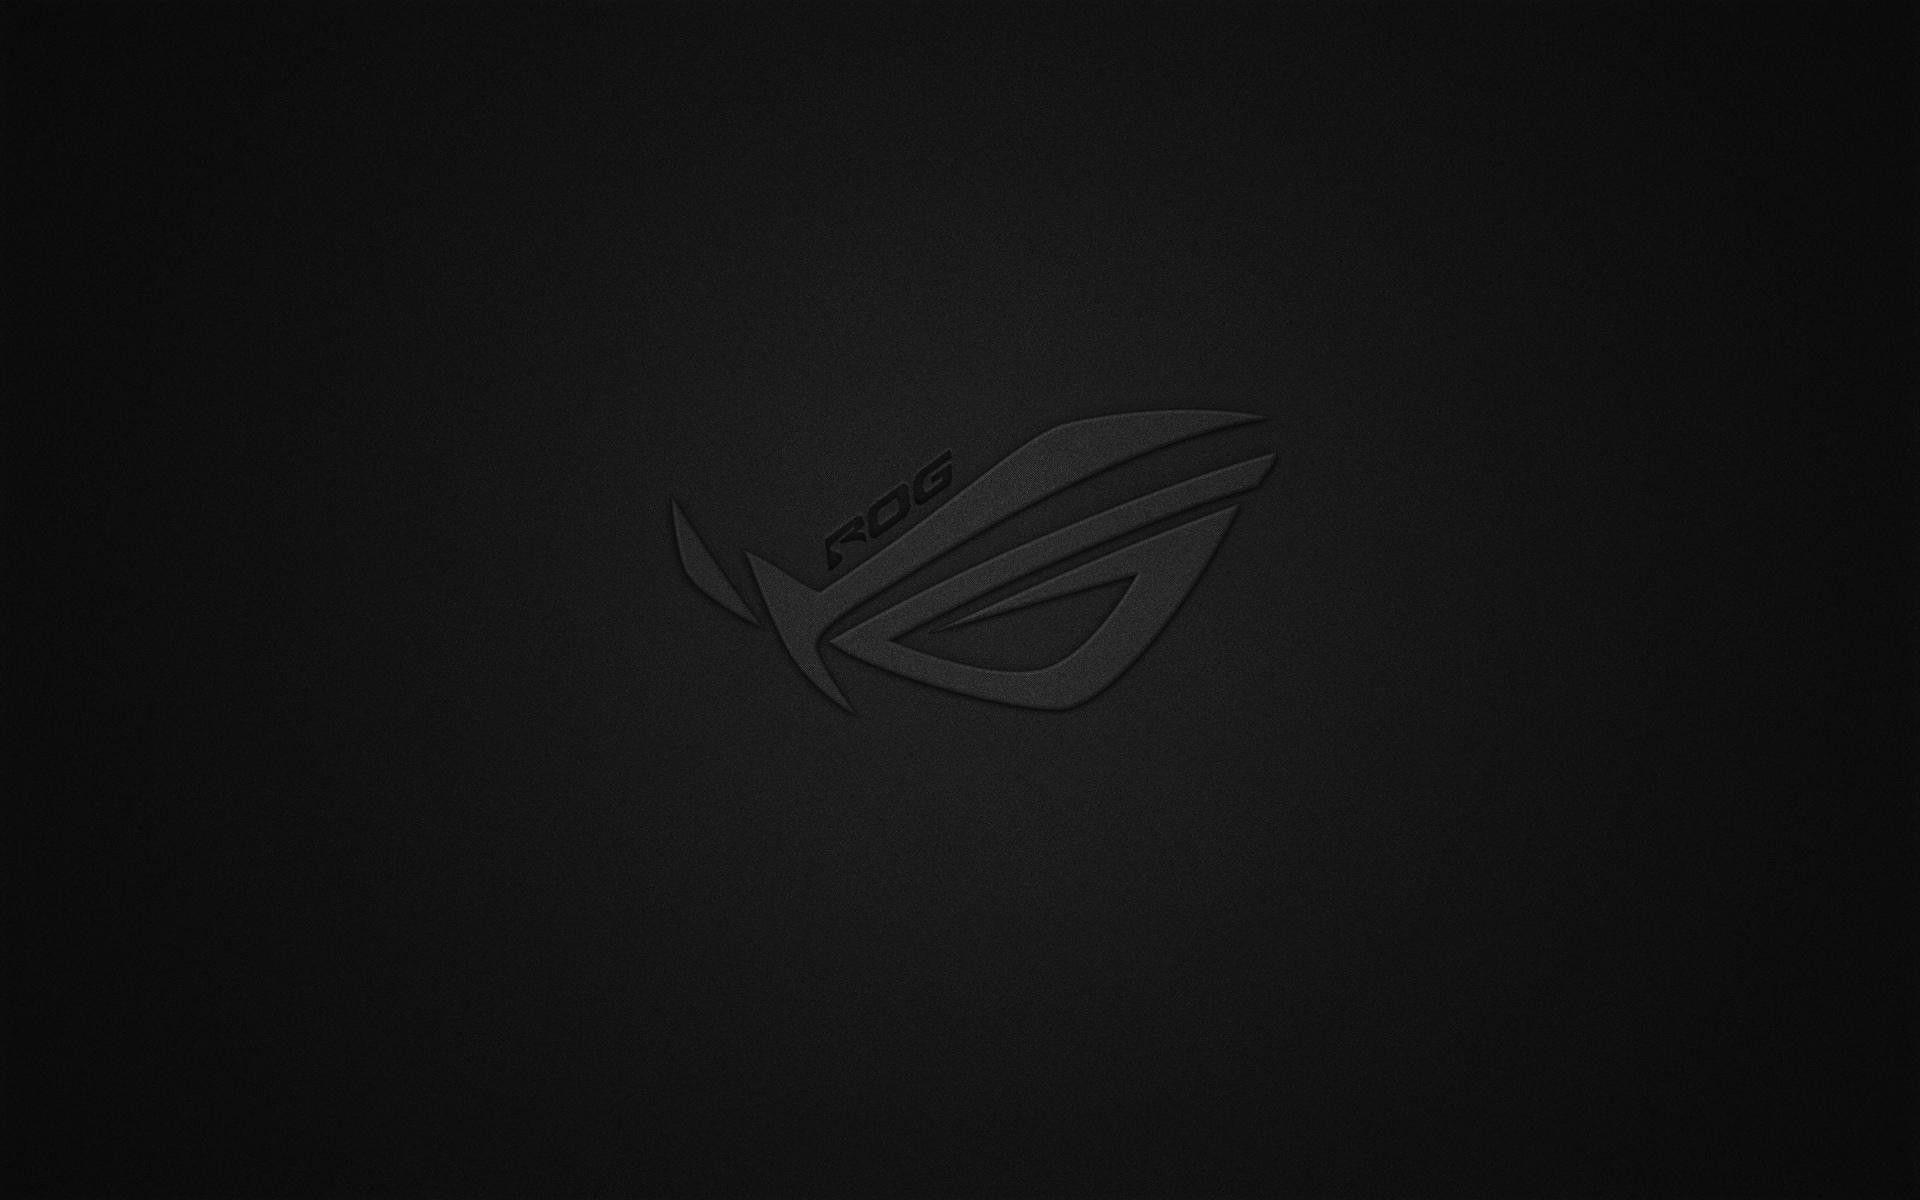 Red Asus Rog Wallpapers Top Free Red Asus Rog Backgrounds